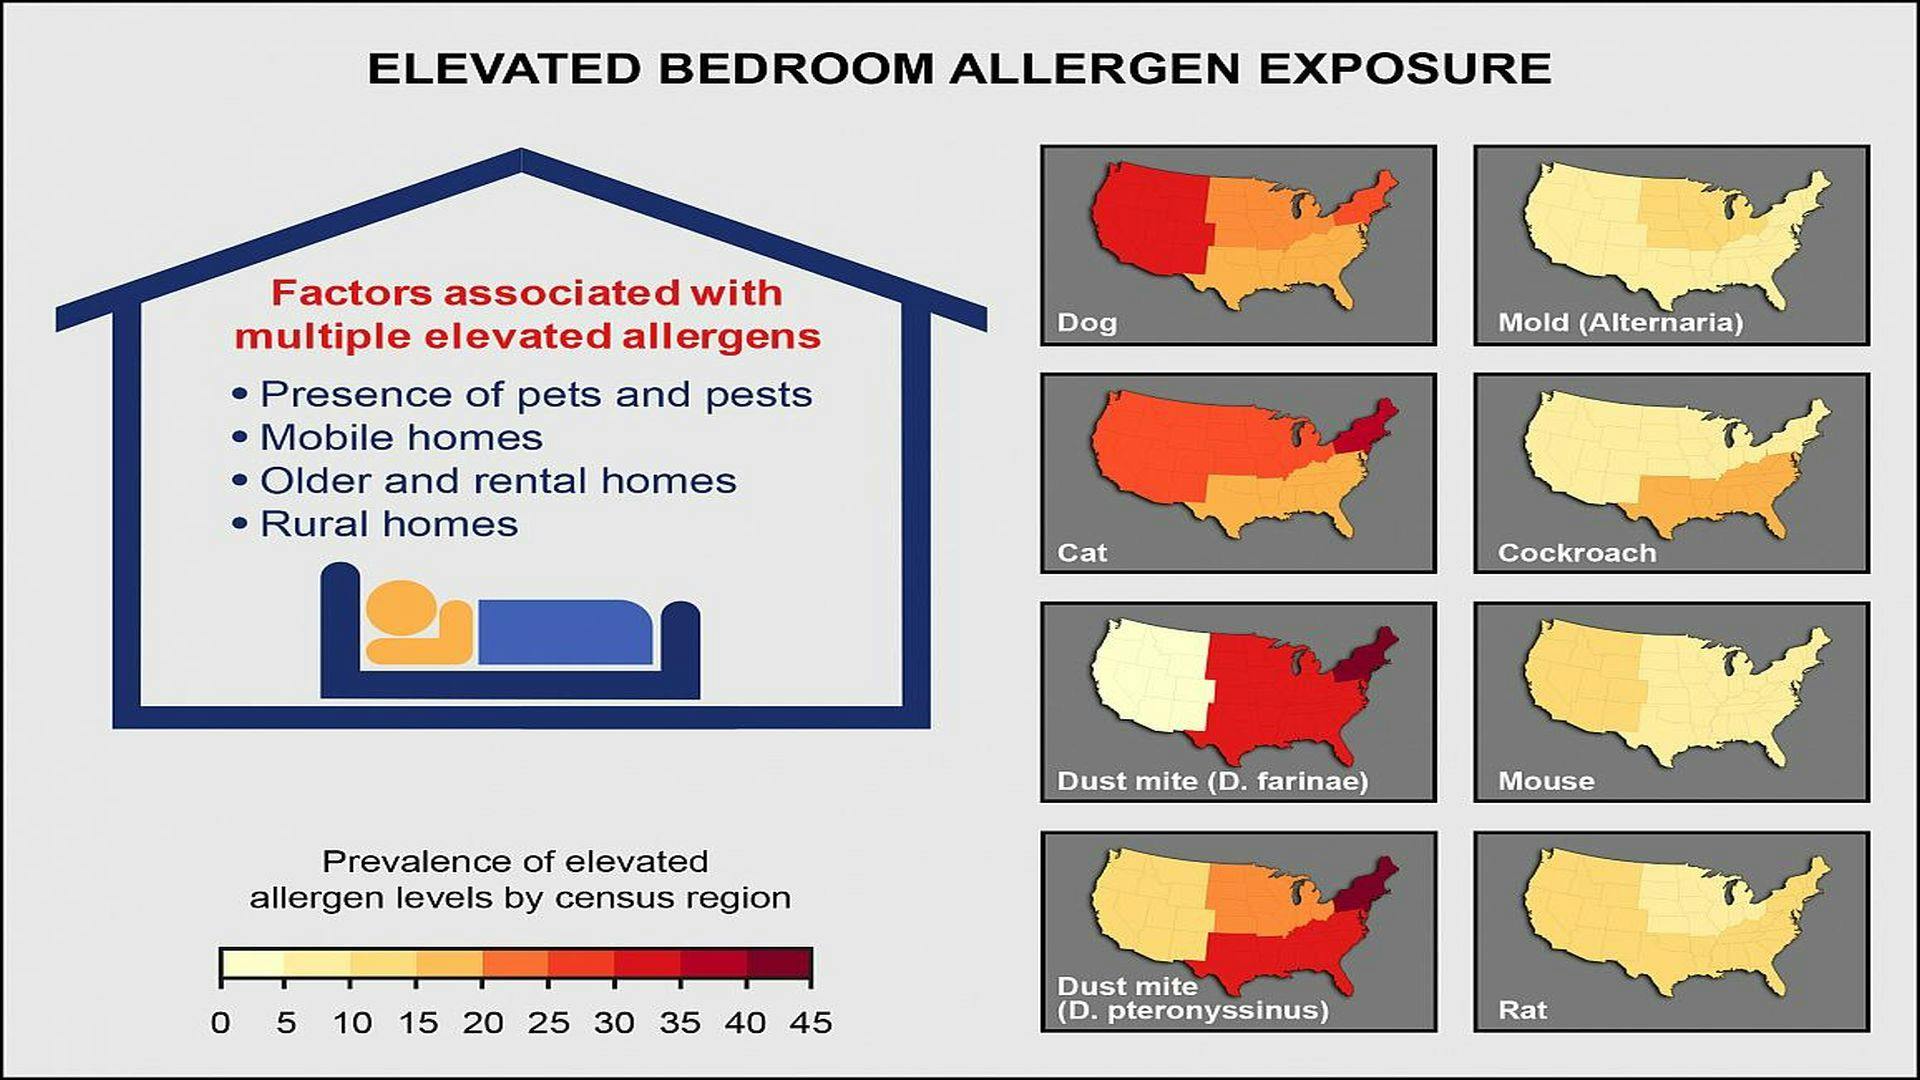 Study Indicates Allergens are Widespread in U.S. Homes